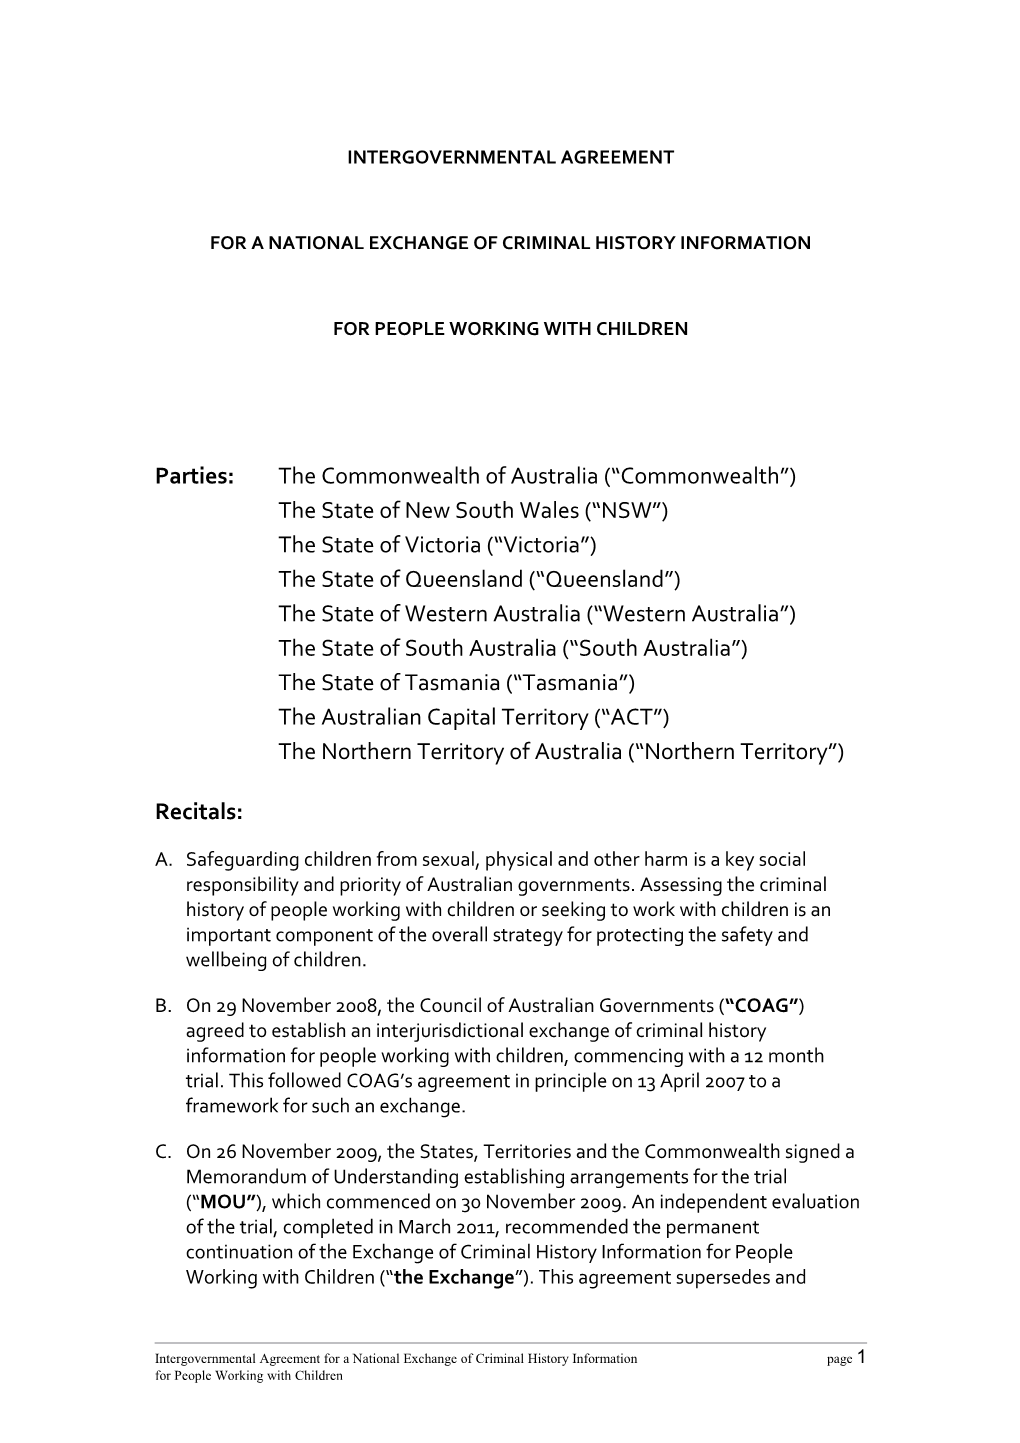 Intergovernmental Agreement for a National Exchange of Criminal History Information